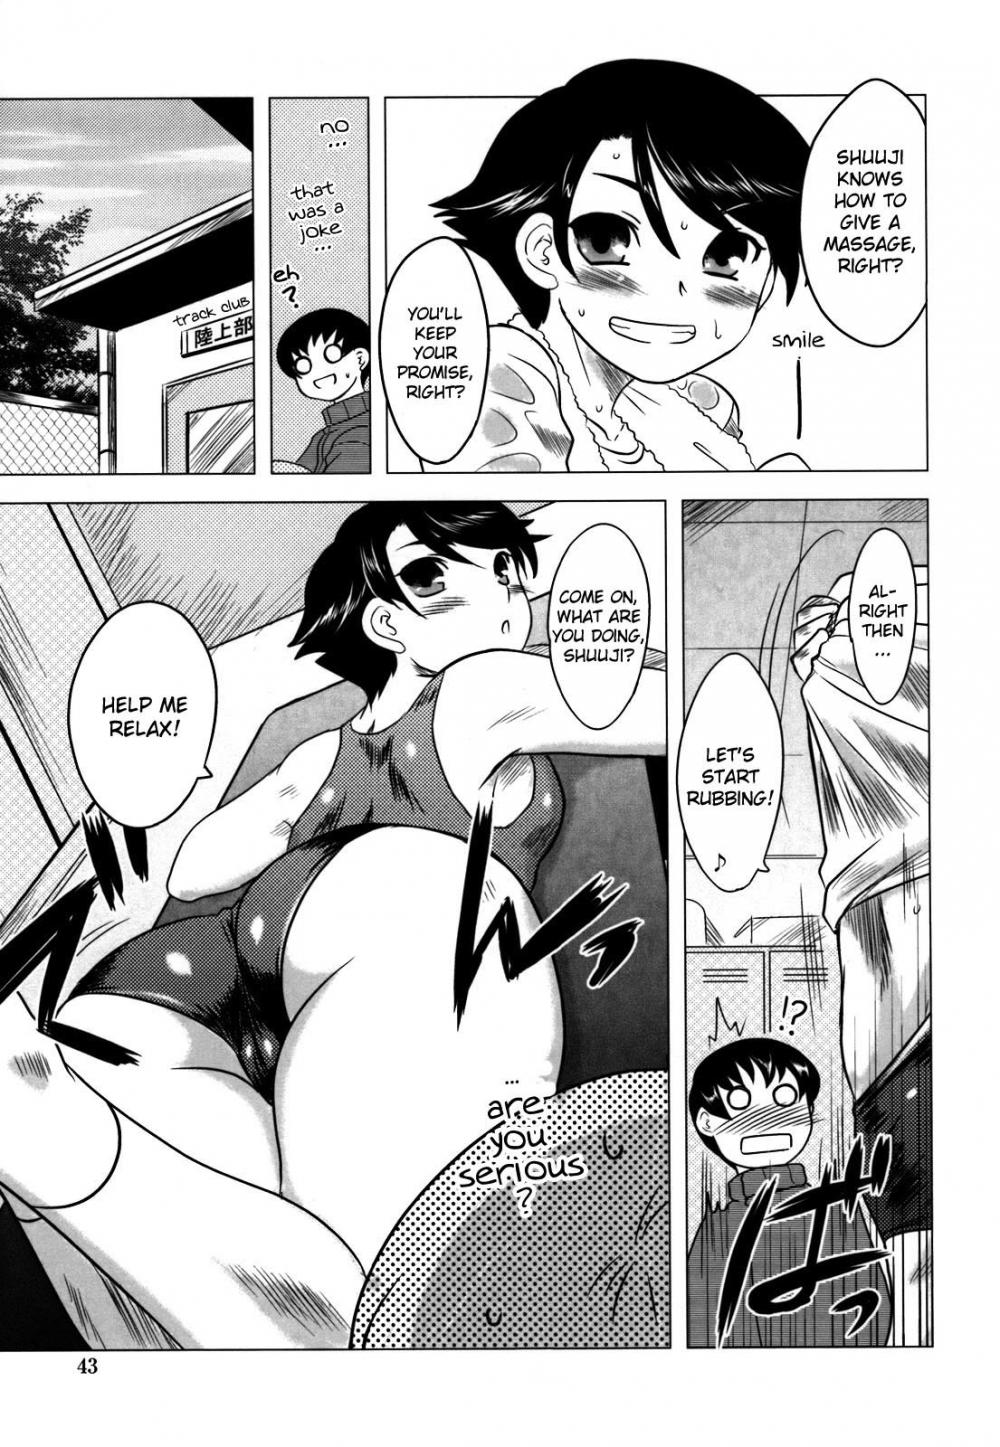 Hentai Manga Comic-Whenever You Touch Me-Chapter 3-3